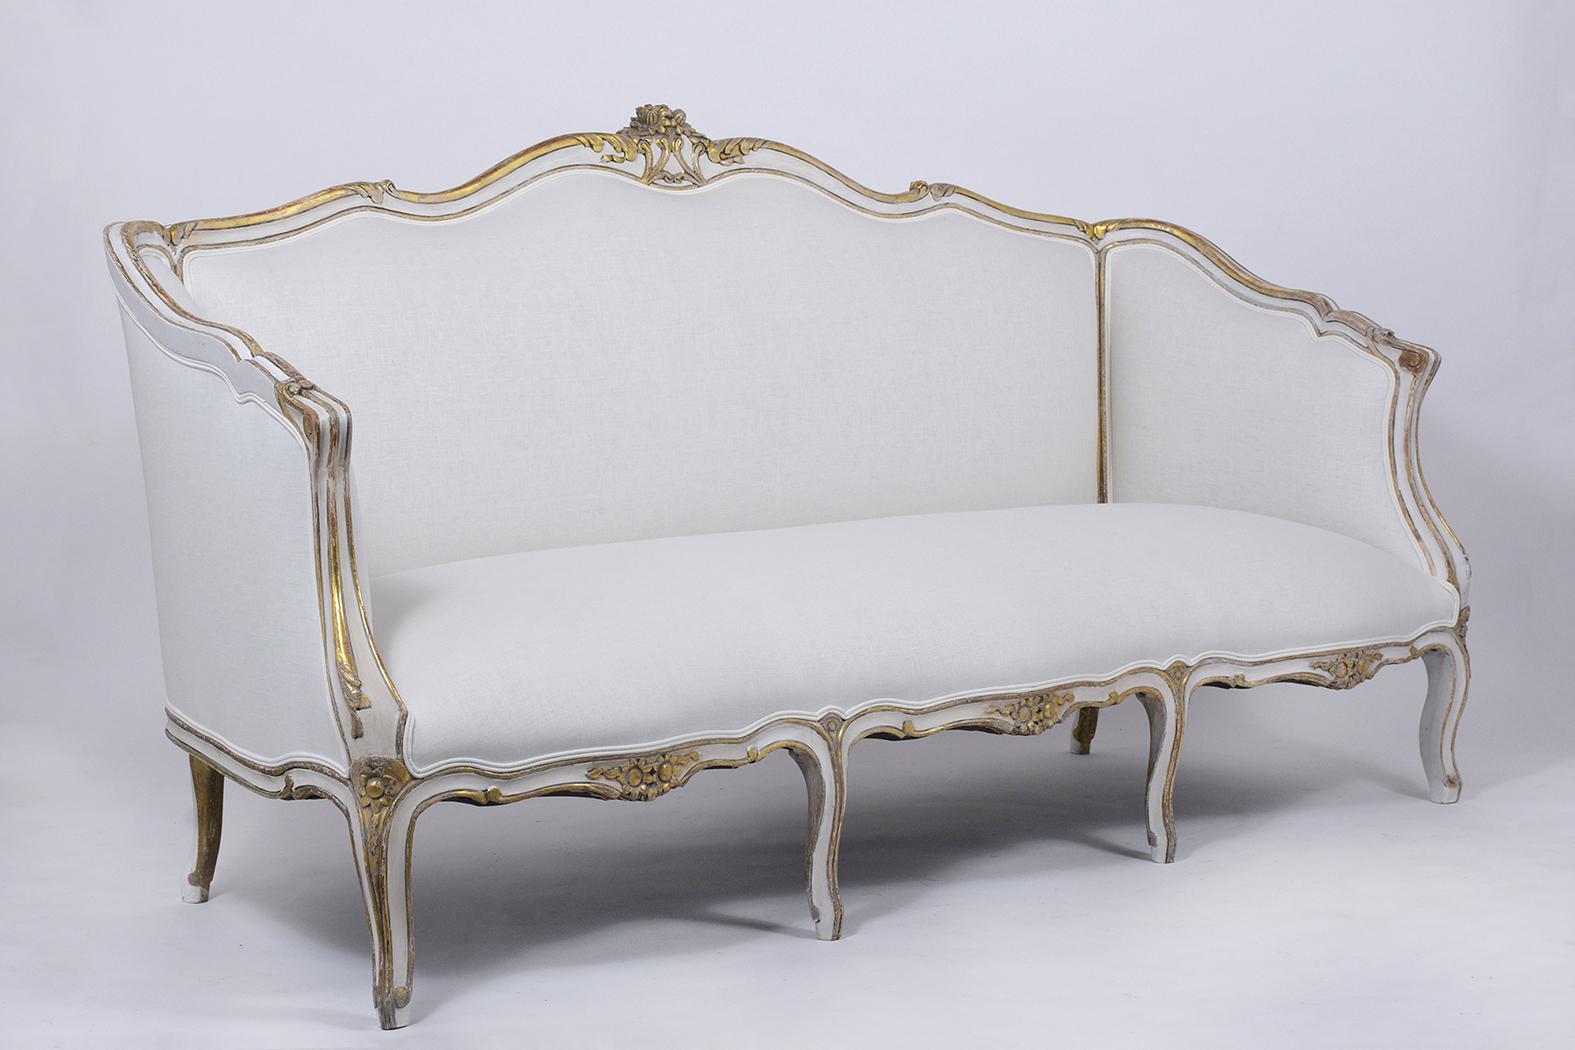 Hand-Crafted Louis XV Gilt Sofa For Sale